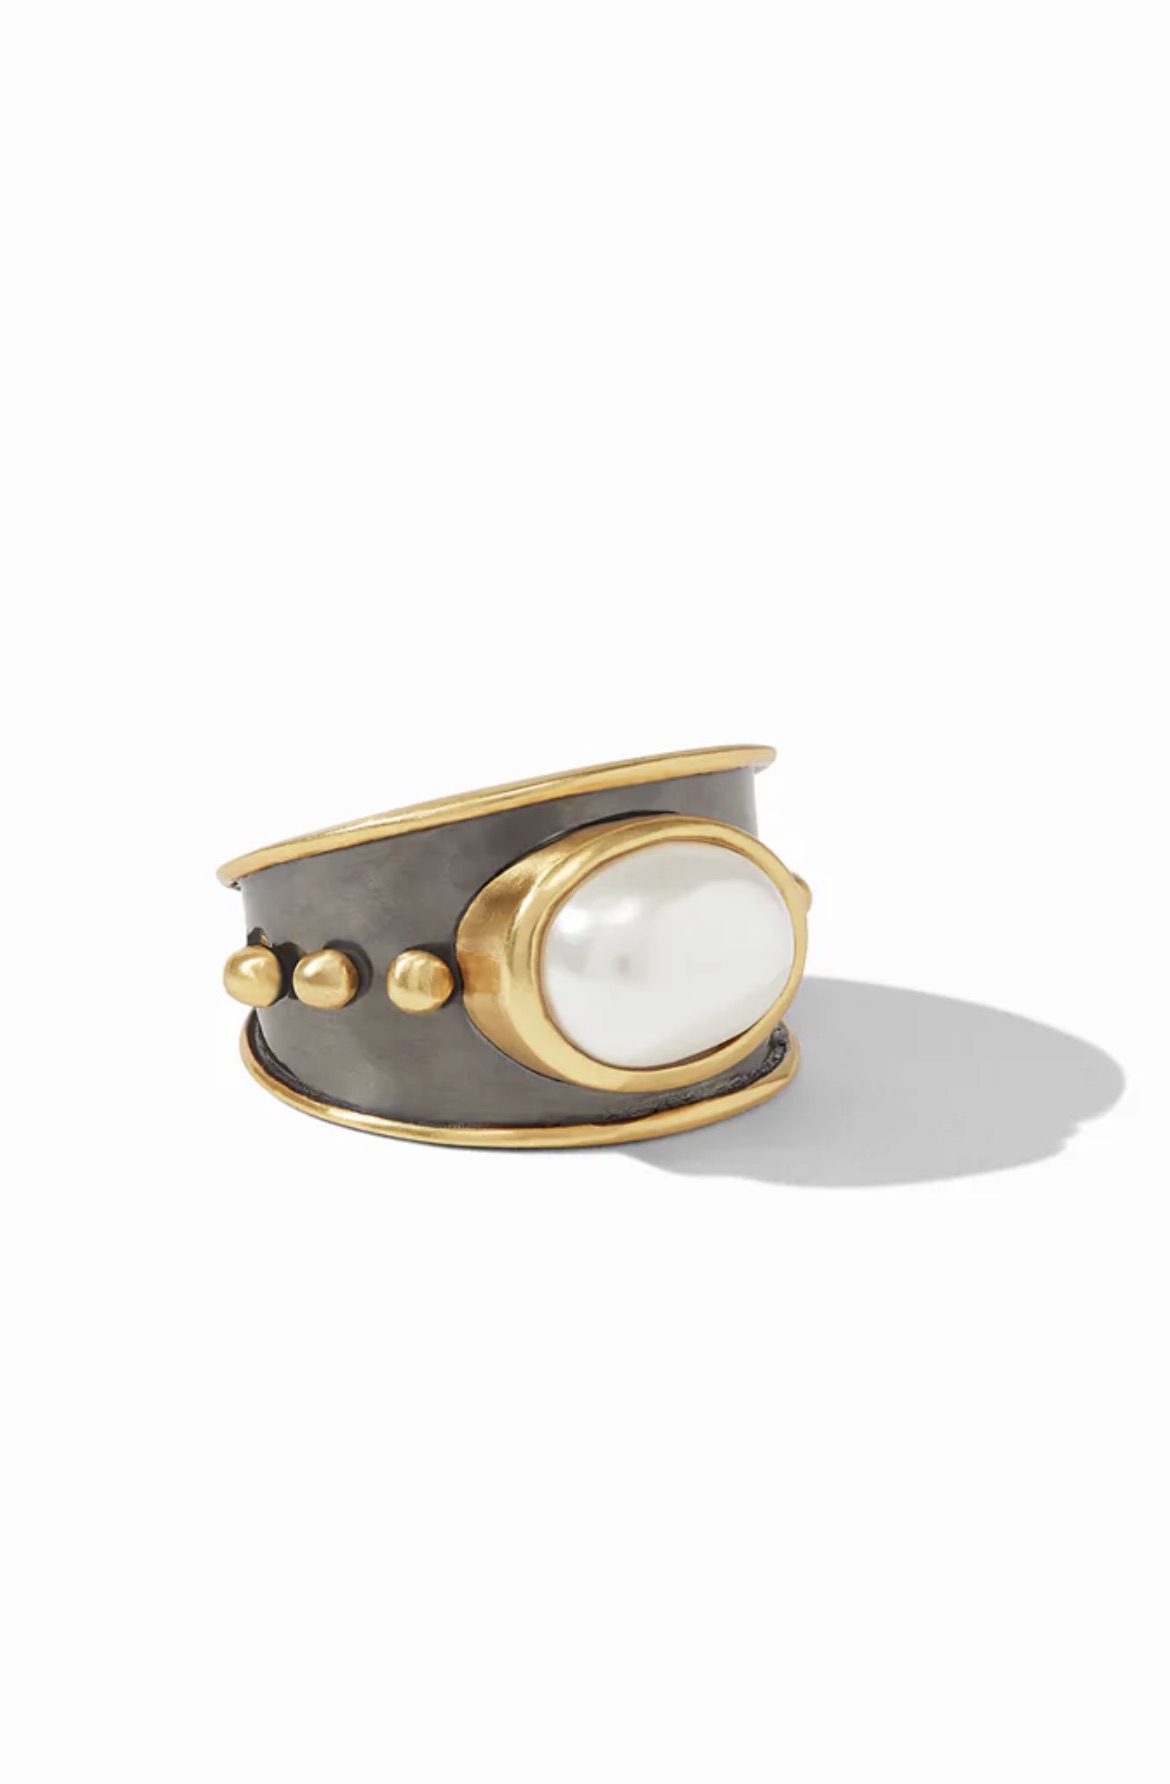 SoHo Ring - Size 8 Mixed Metal and Pearl